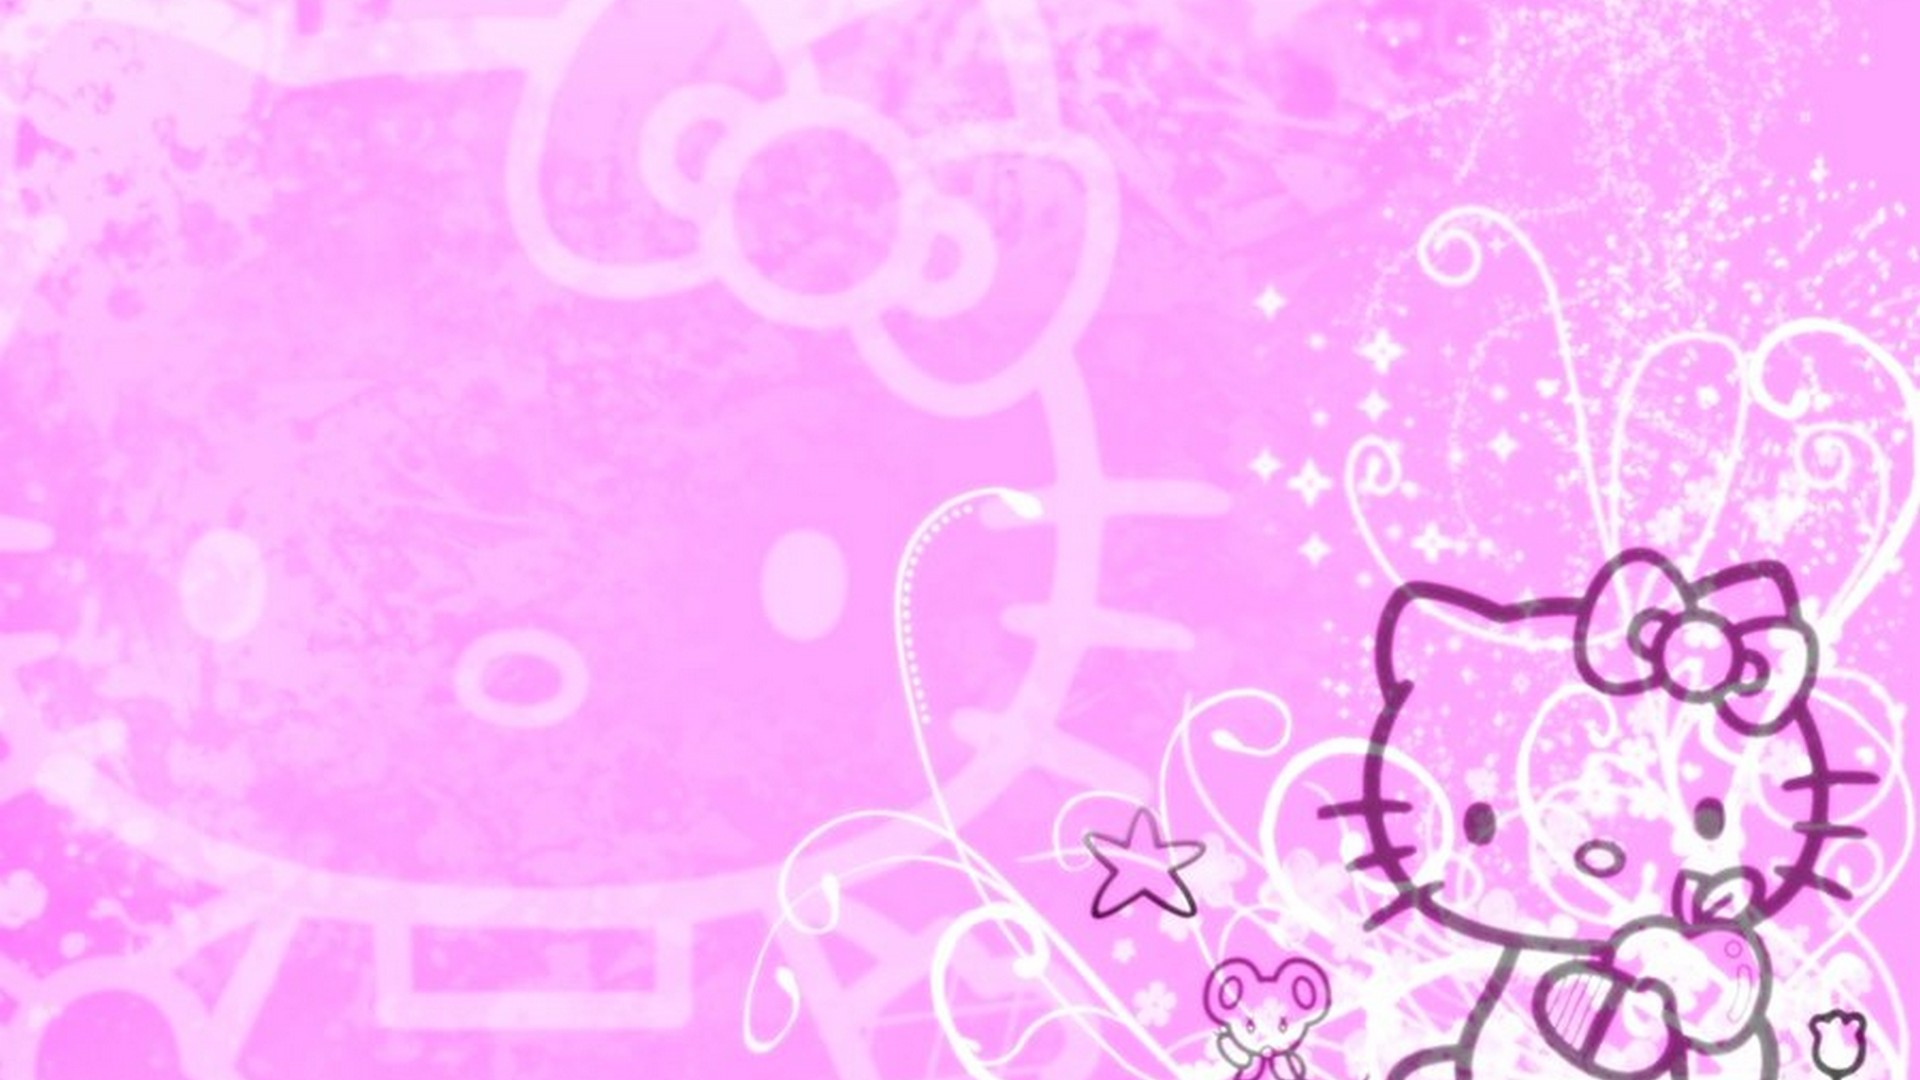 Hello Kitty Images Desktop Backgrounds with image resolution 1920x1080 pixel. You can make this wallpaper for your Desktop Computer Backgrounds, Mac Wallpapers, Android Lock screen or iPhone Screensavers